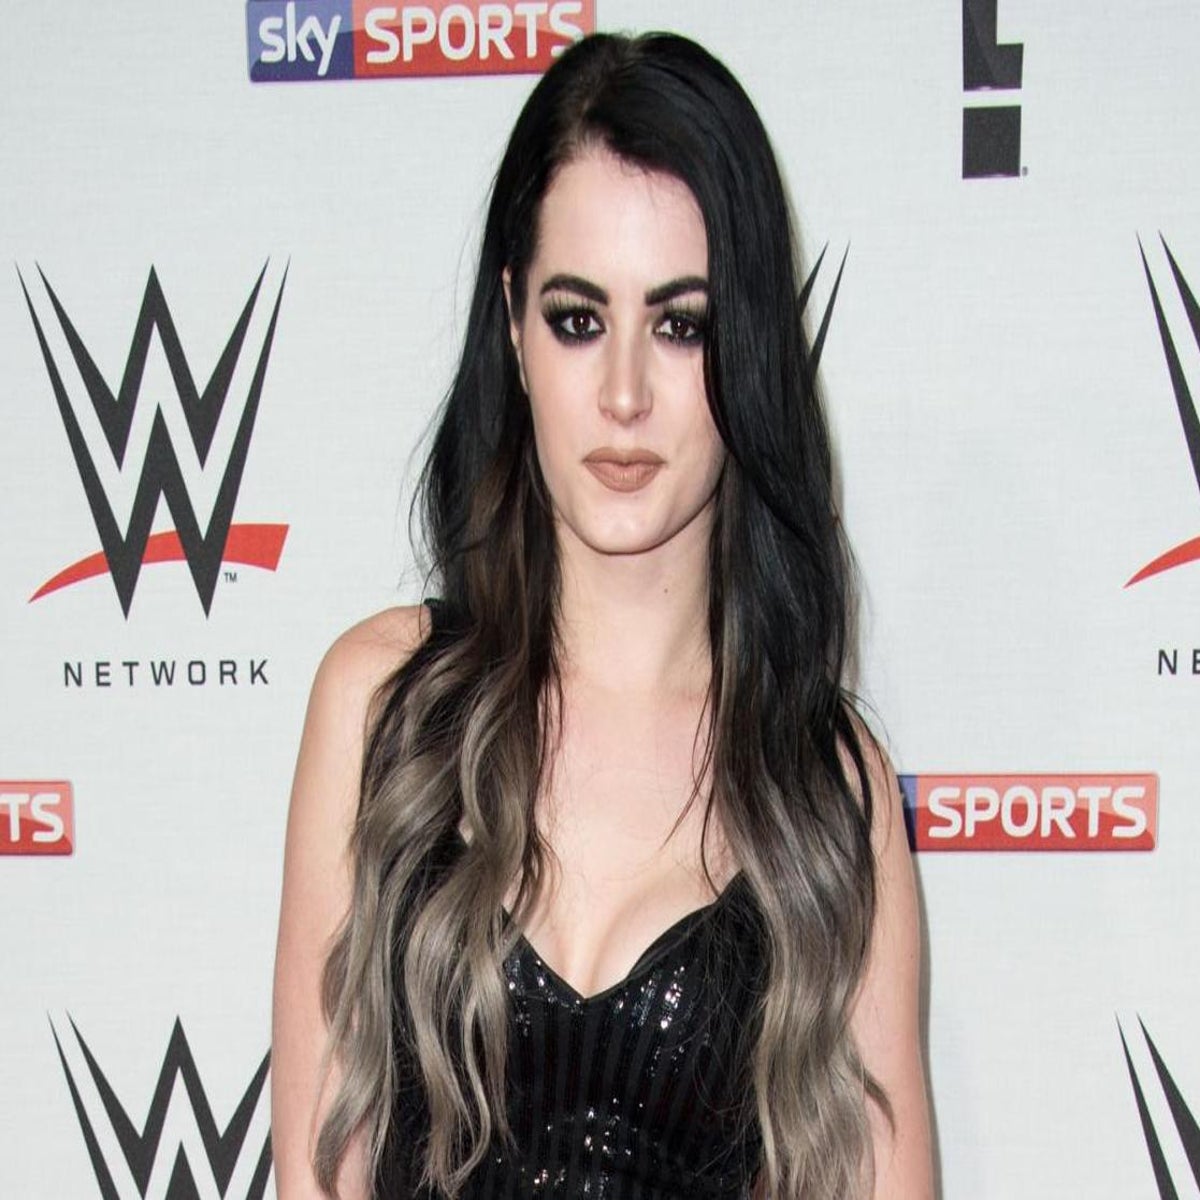 Wwe Raw Sex 2019 - Paige sex tape leak caused WWE star to develop anorexia | The Independent